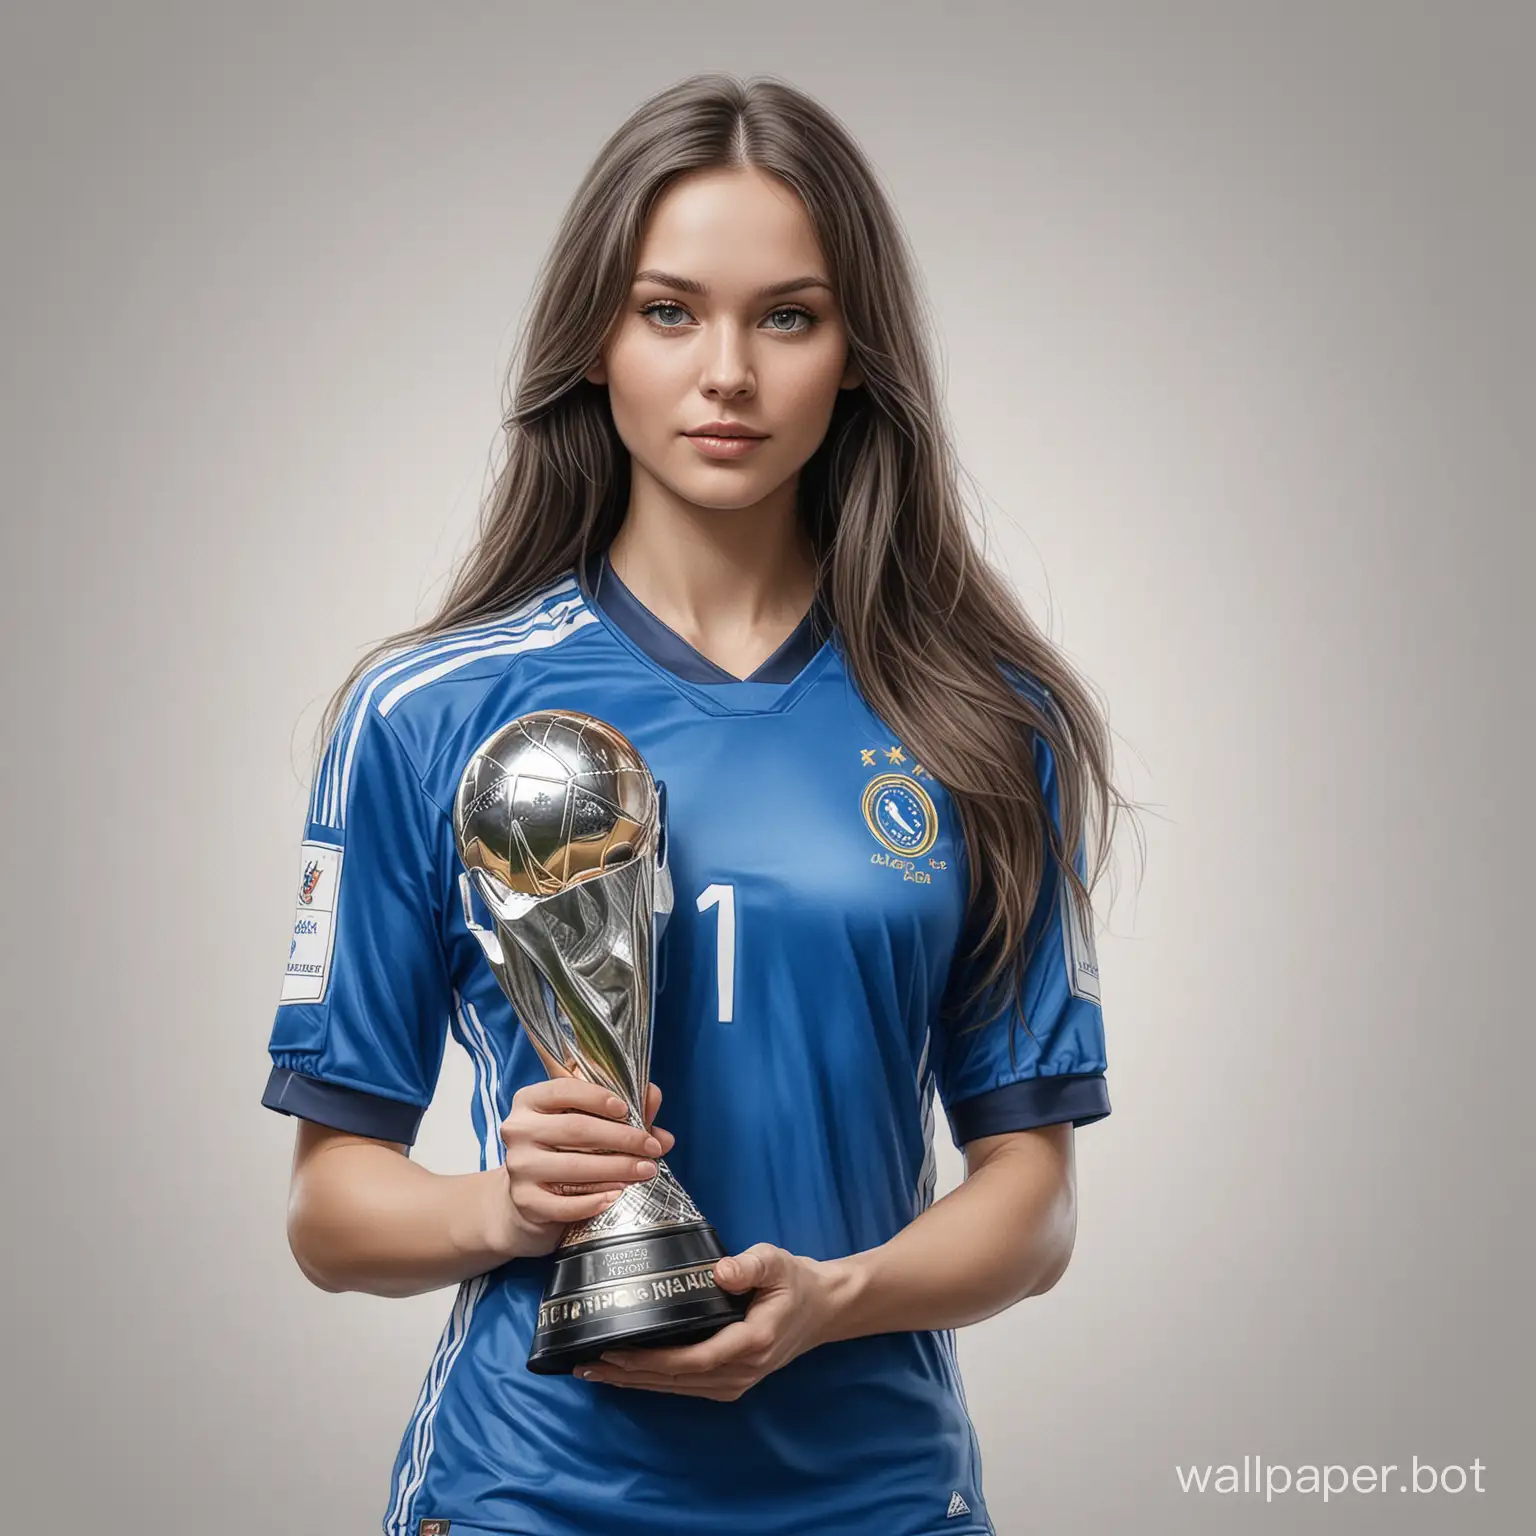 Young-Woman-with-Long-Dark-Hair-Holding-Champions-League-Trophy-in-Blue-Soccer-Uniform